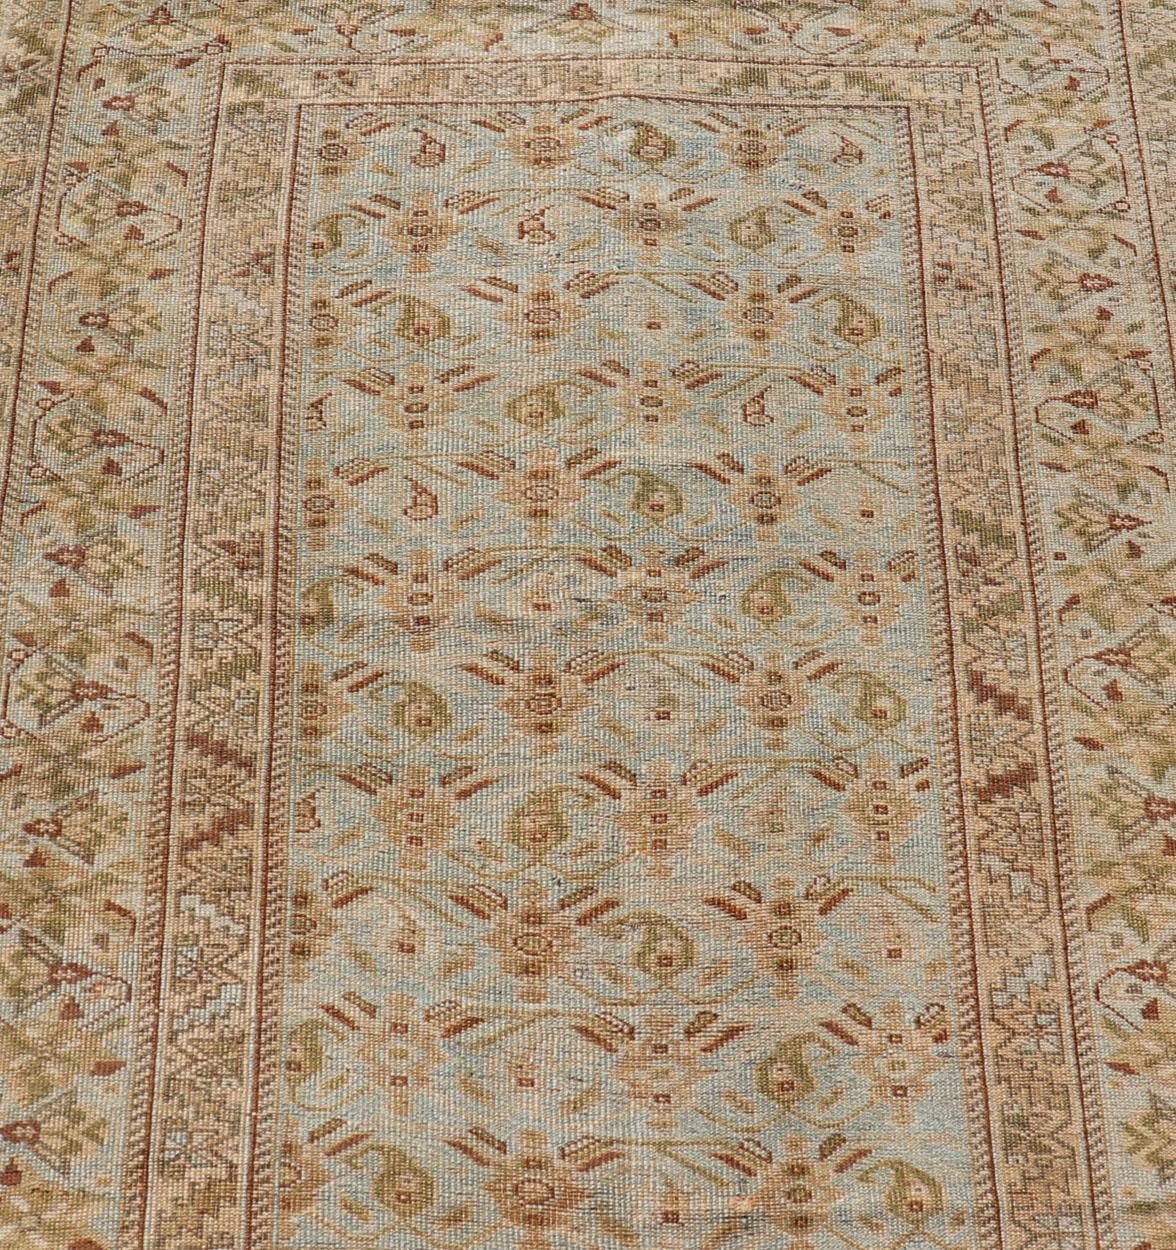 Measures: 3'8 x 4'10 
 Fine Persian Antique Afshar Rug in Green, Browns, and Blue Tribal Carpet. Keivan Woven Arts/ Rug/EN-14884, Antique Afshar Early 20th Century

rich symbolism, and fine intricacy contribute to the marvelous beauty of this